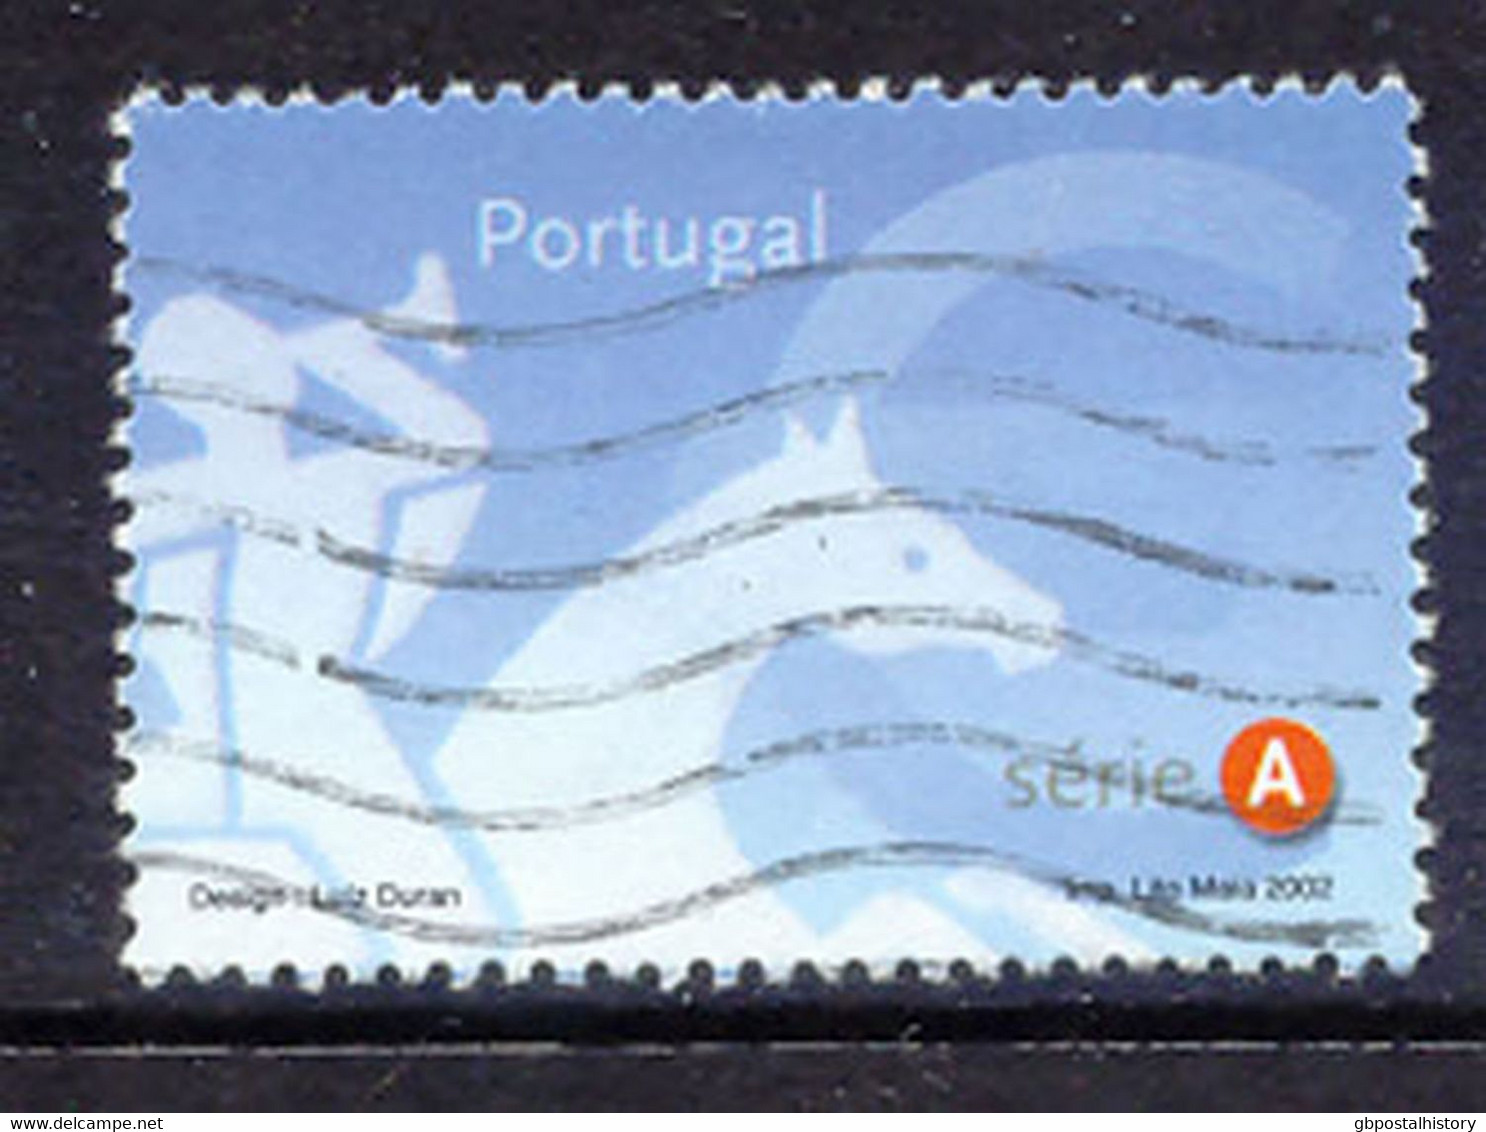 PORTUGAL 2002, Postemblem - (€), MAJOR VARIETY (Michel So Far Unknown) VFU - Used Stamps